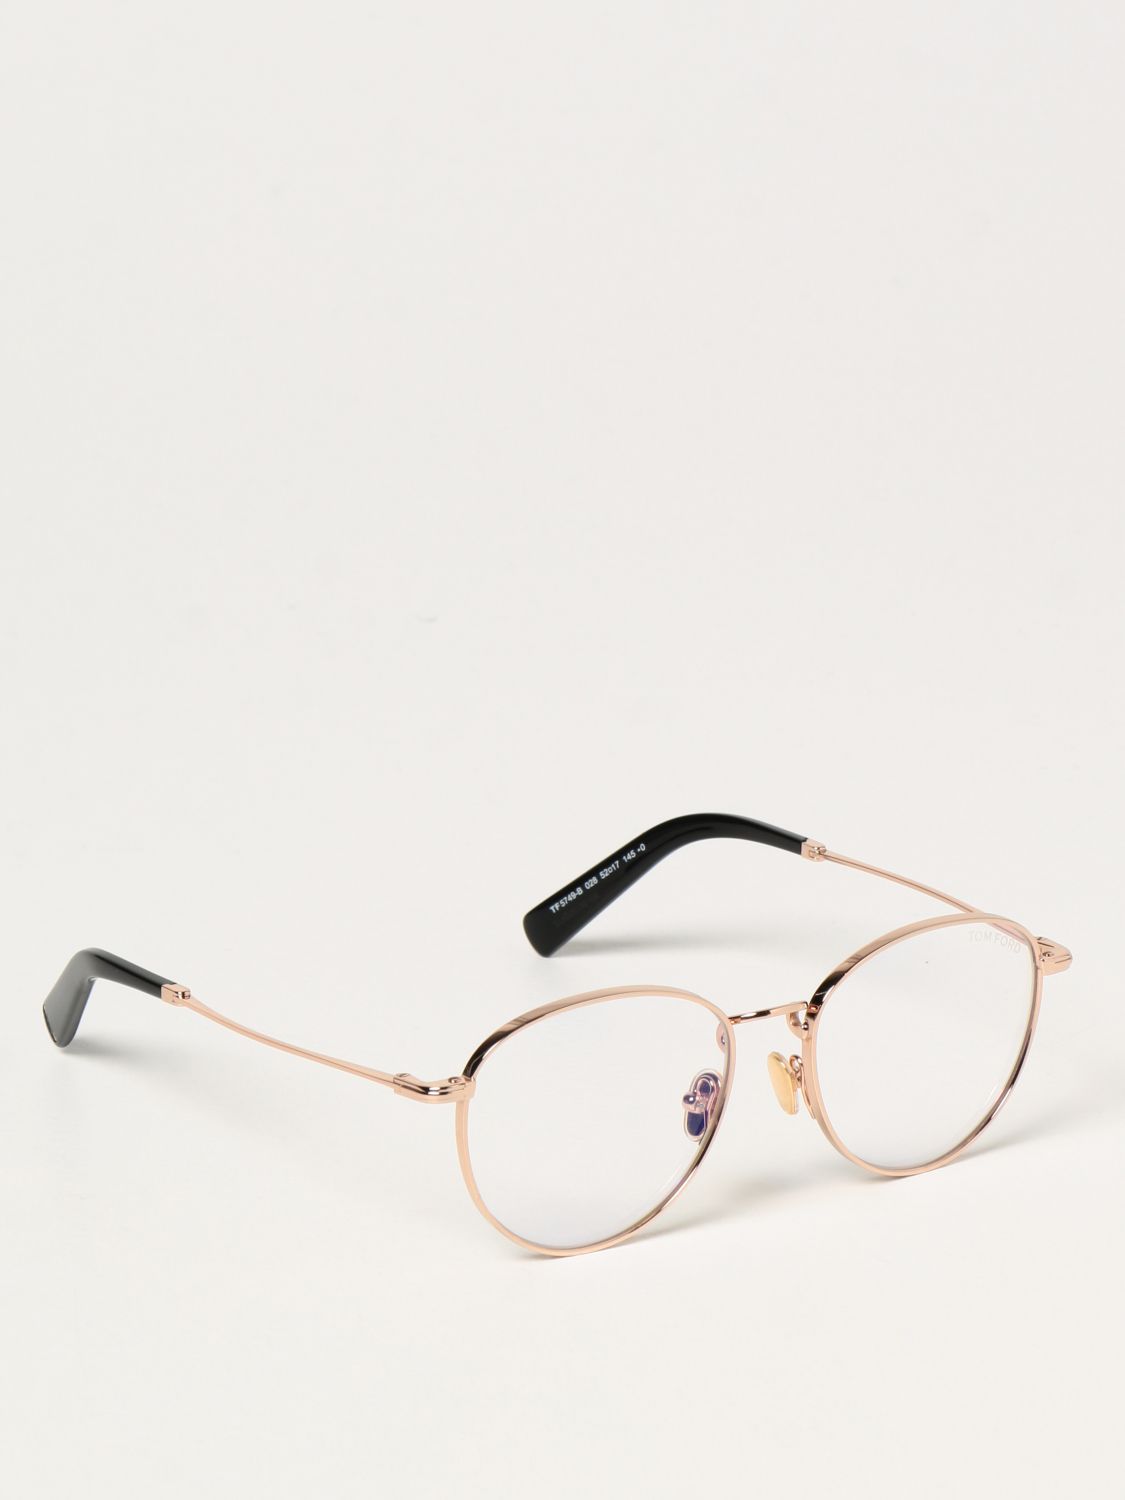 Lunettes Tom Ford: Lunettes homme Tom Ford or 1